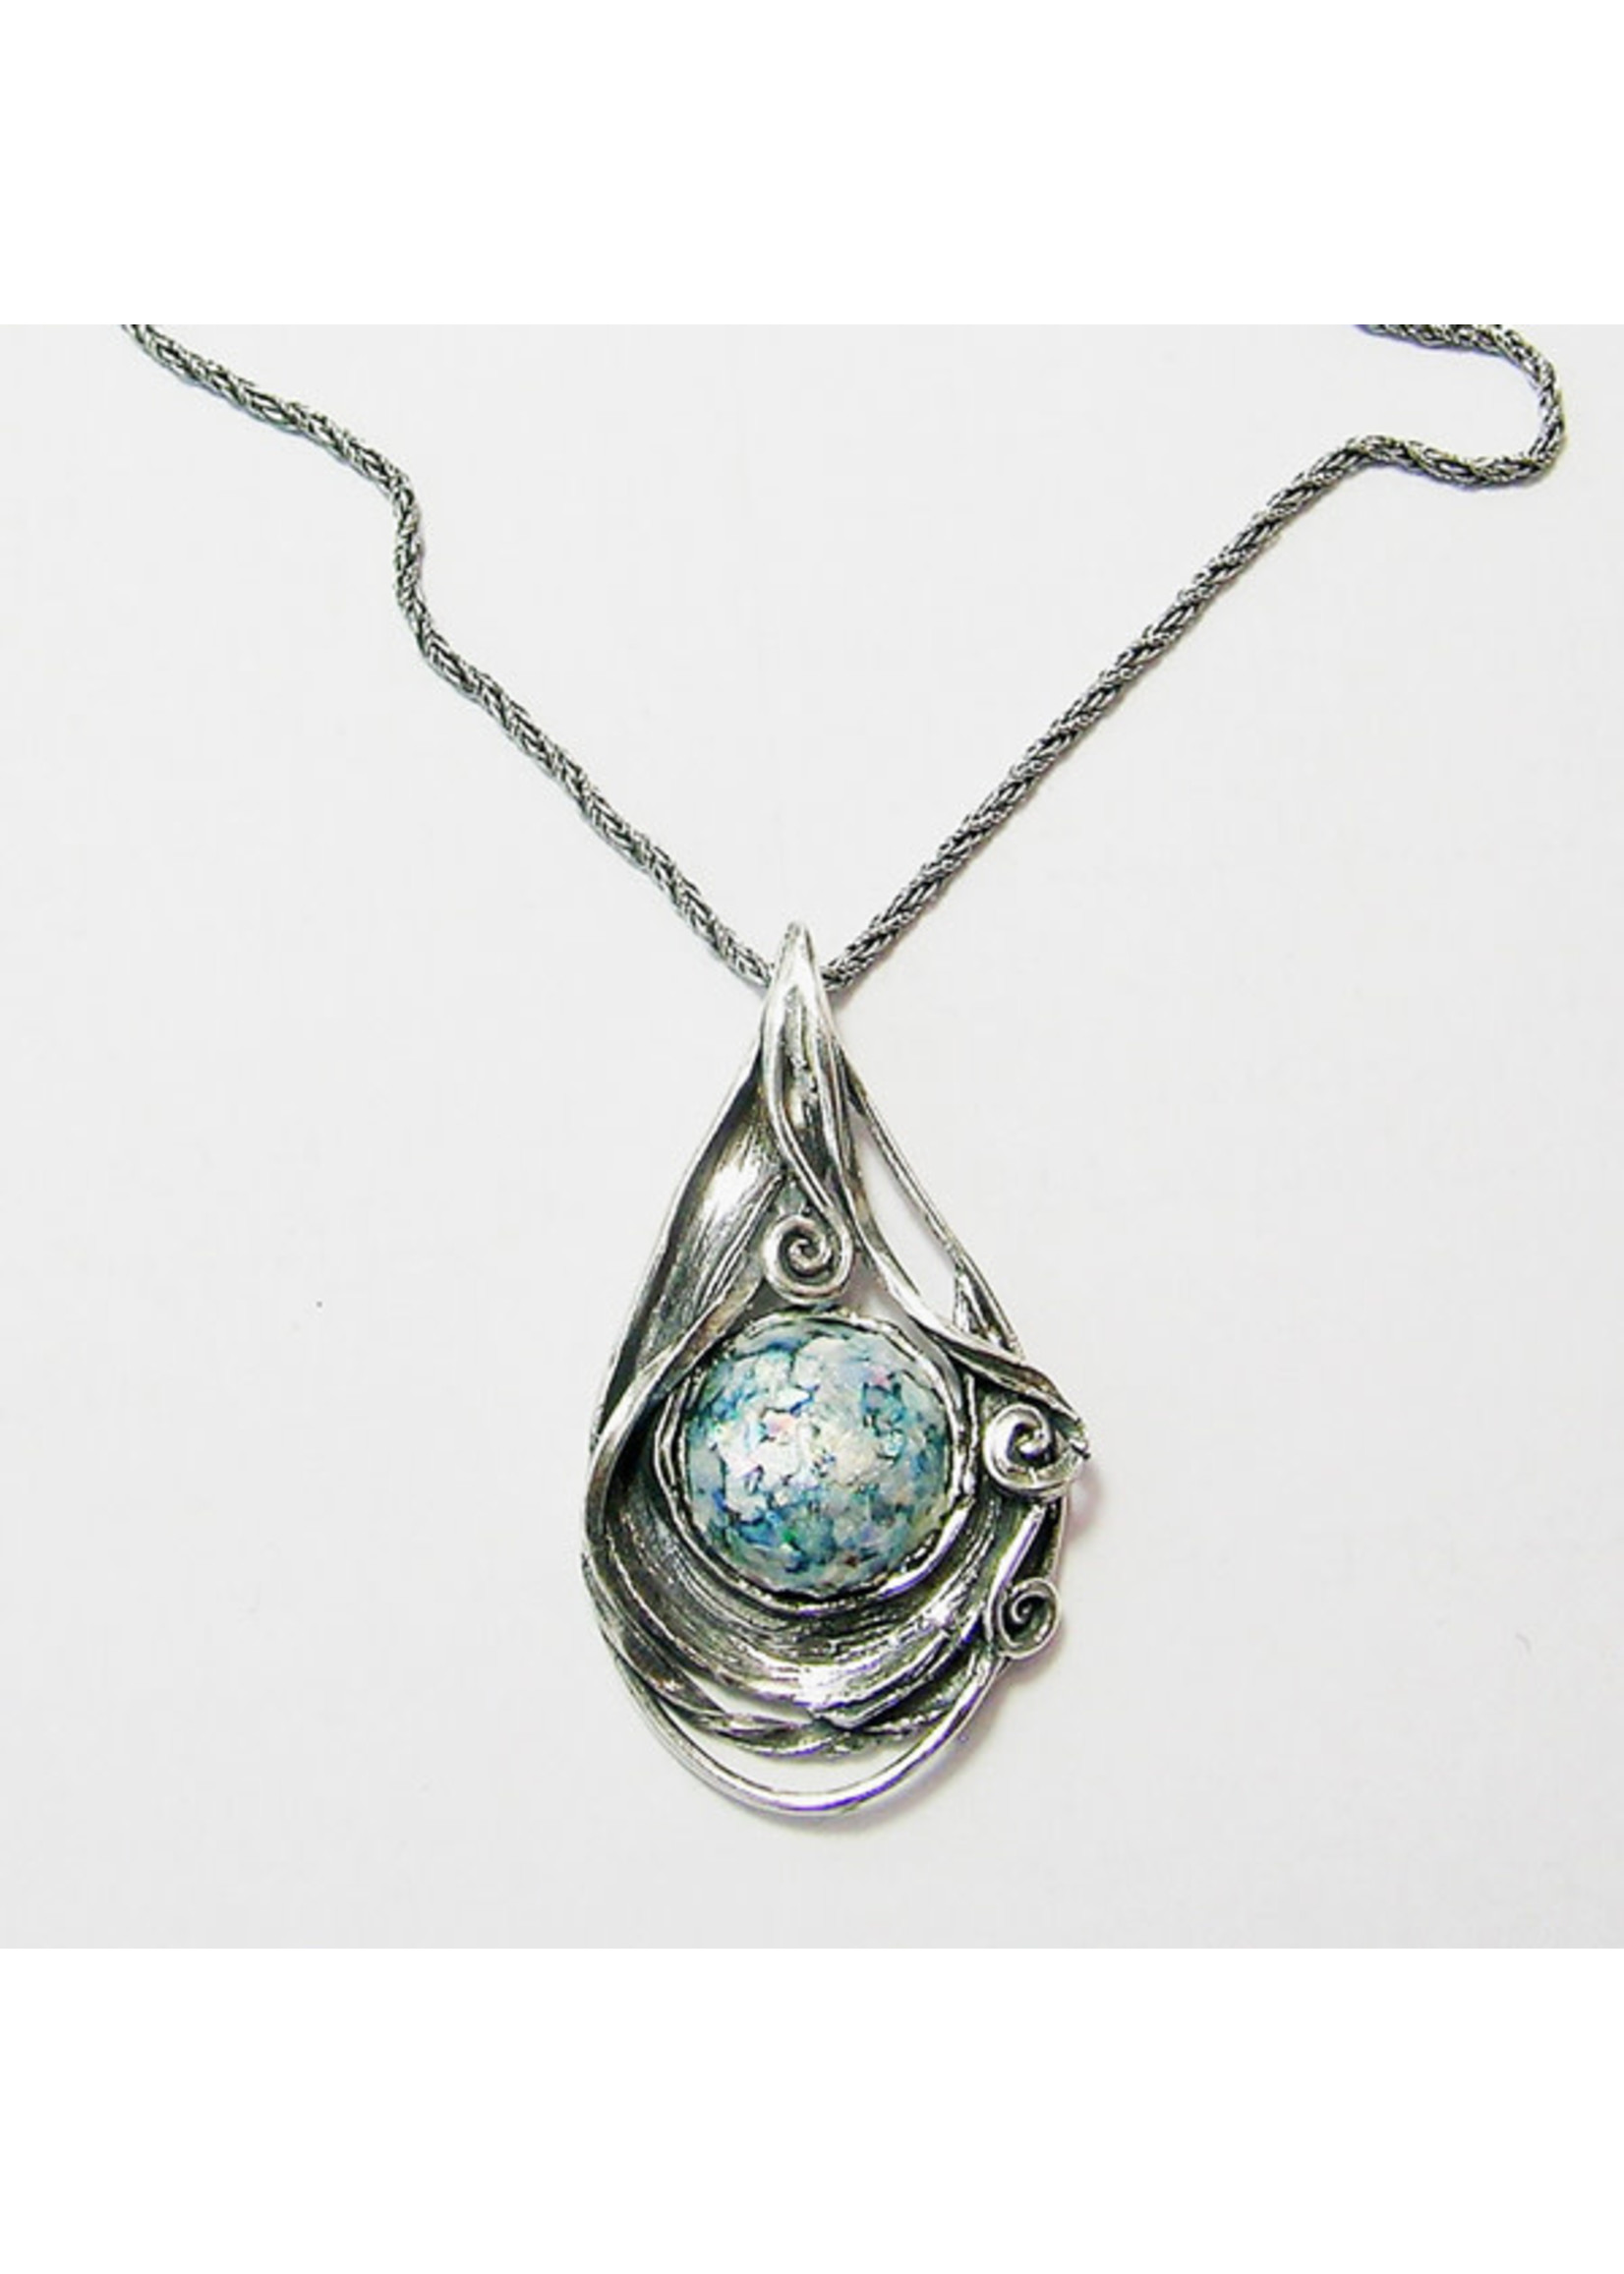 EAST WIND SILVER CO Ovoid Roman Necklace